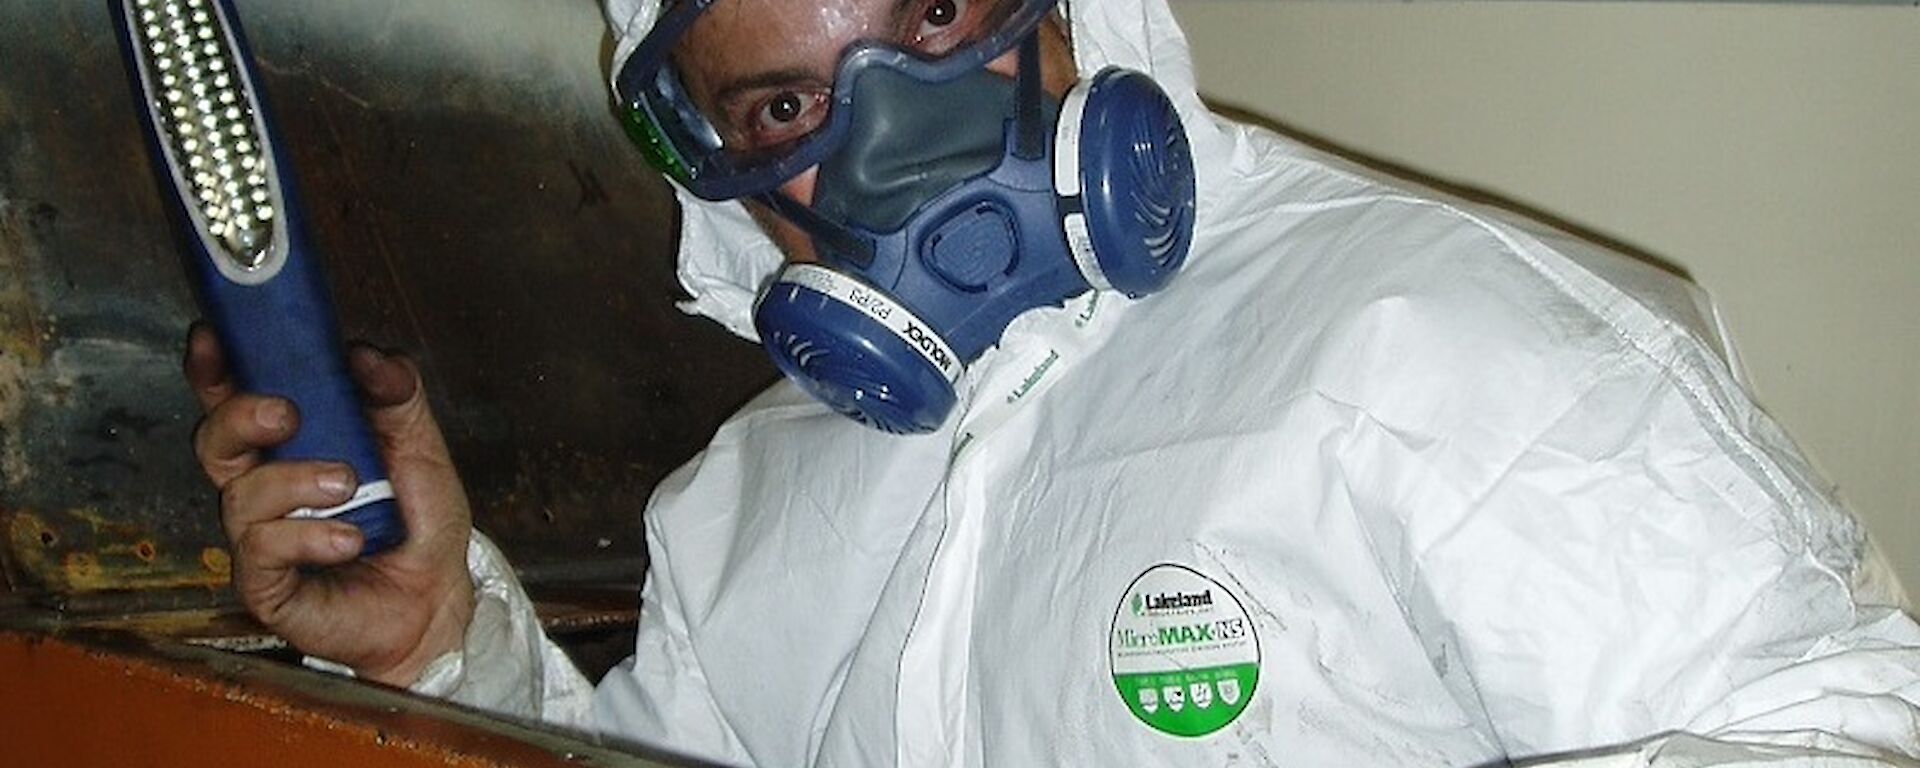 Tony is in the workshop, wearing a protective suit and a breathing mask